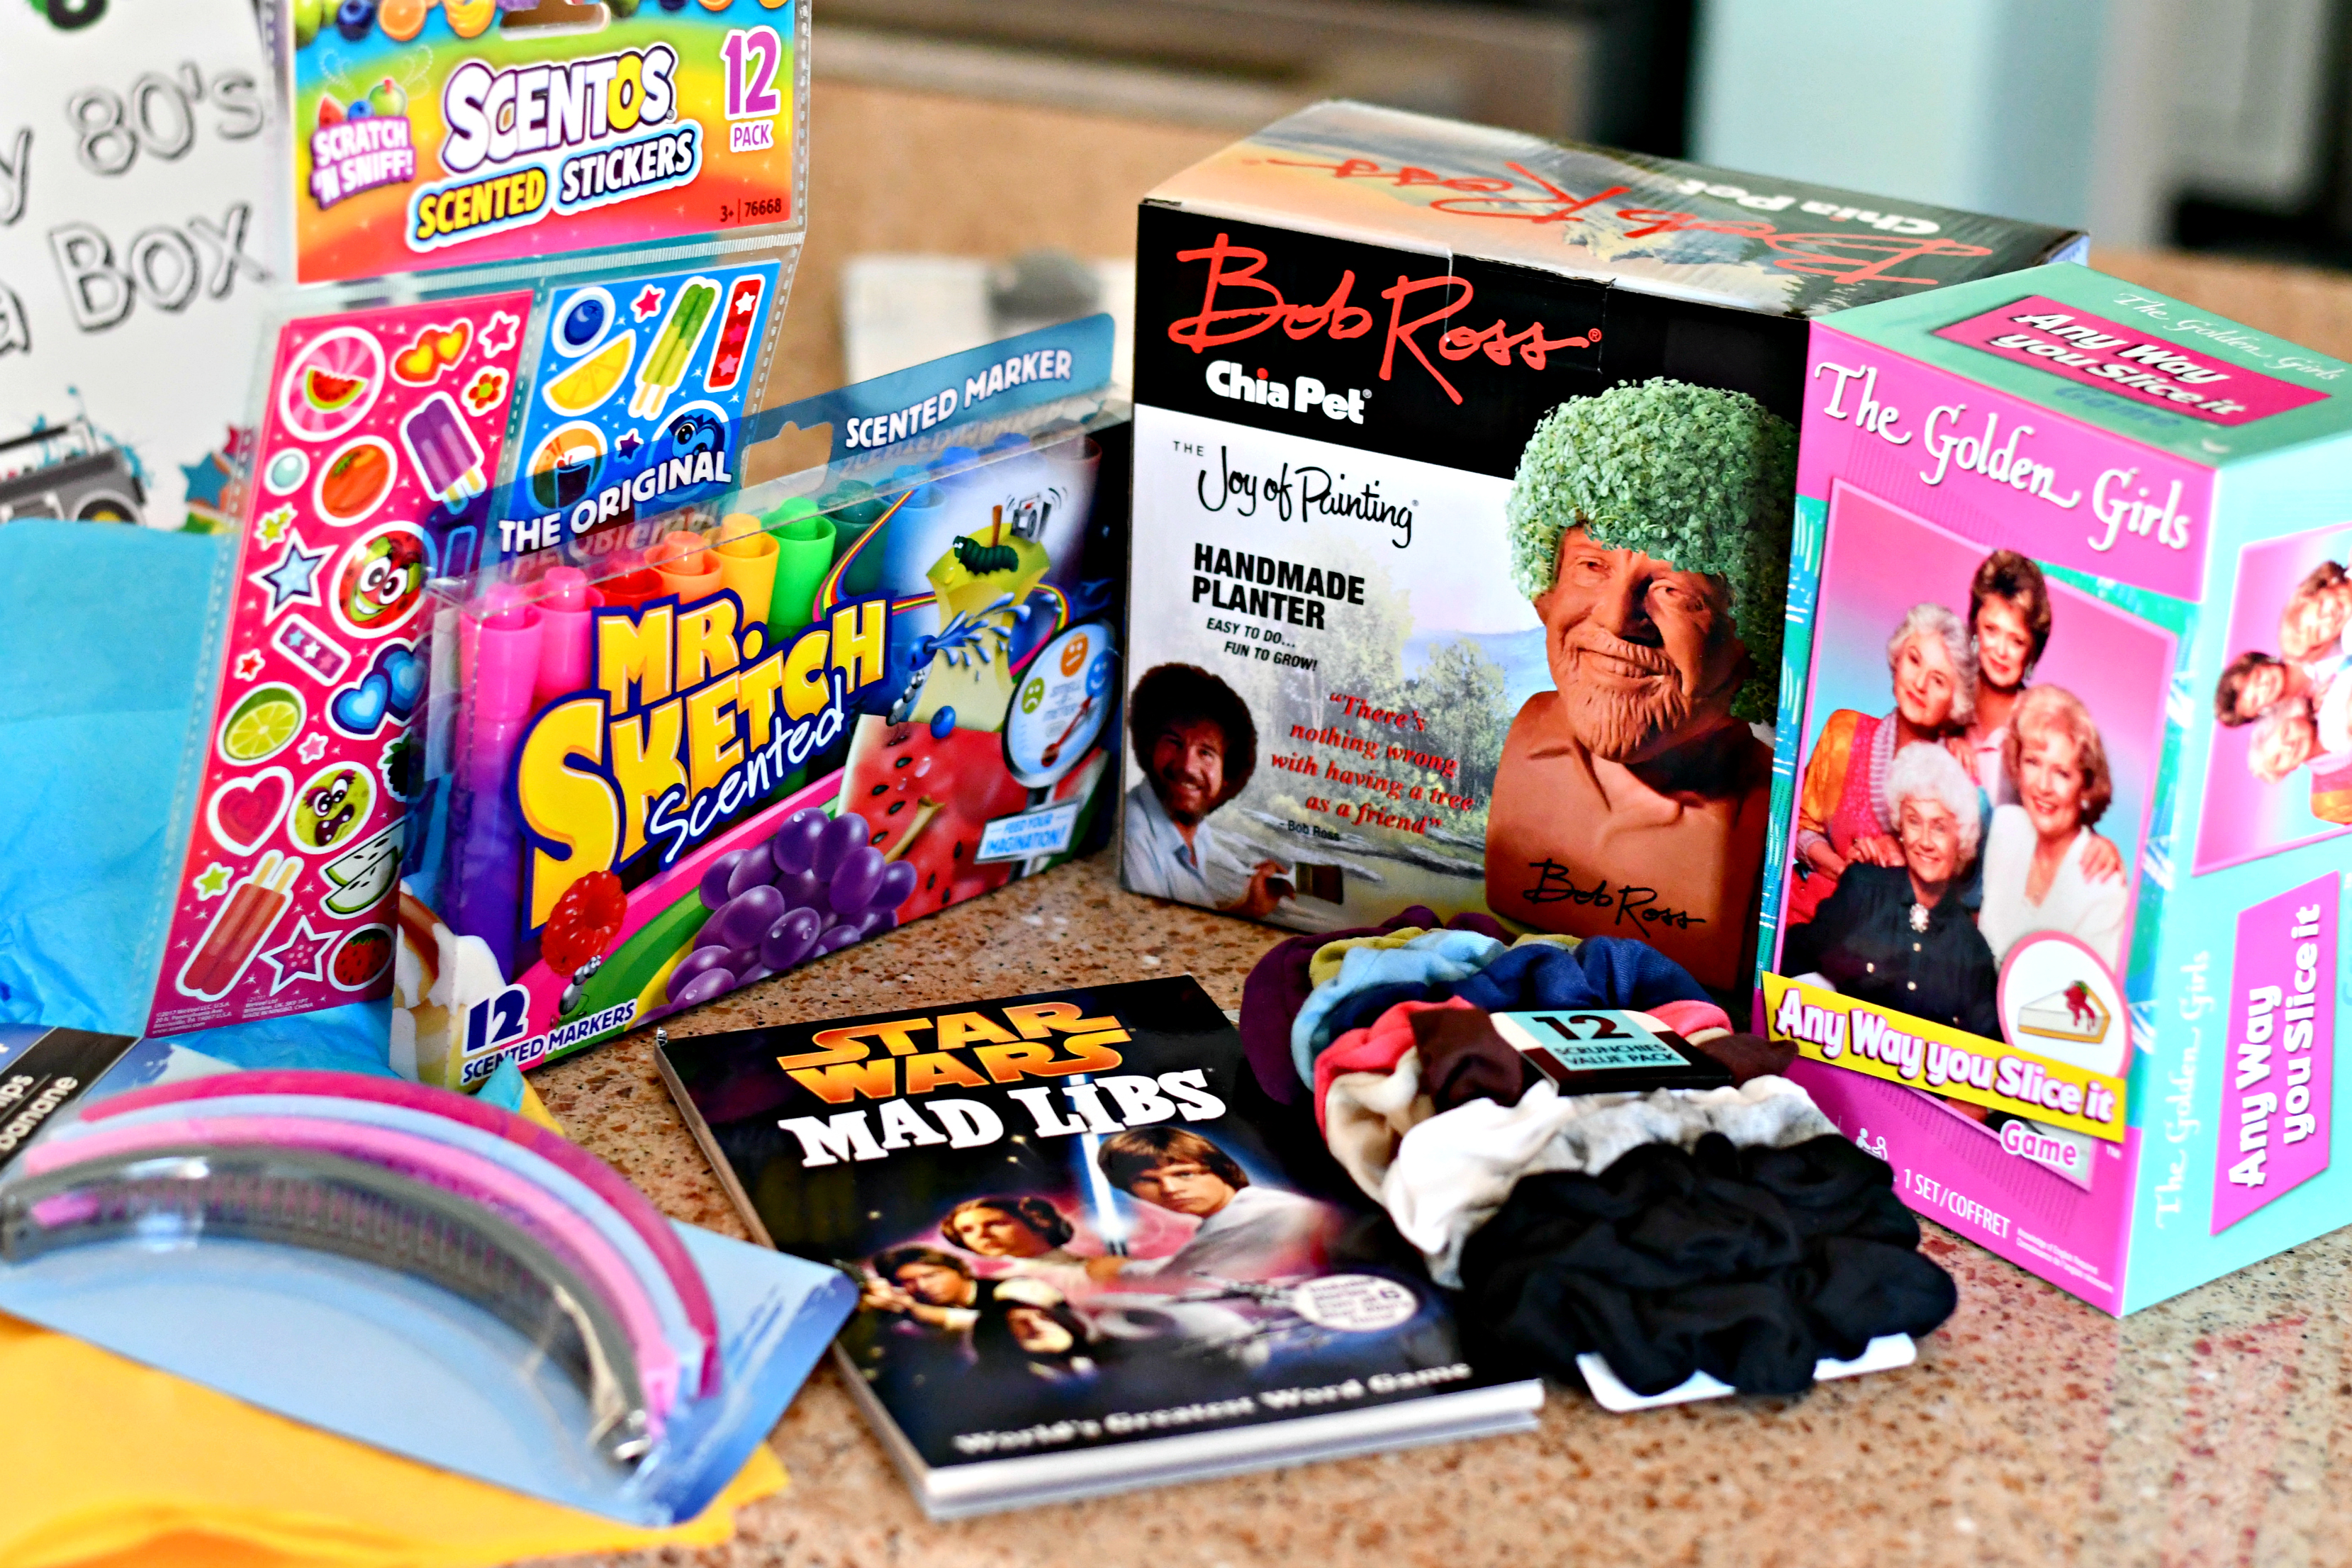 80s box gift idea – chia pet, scented markers, banana clips, and more